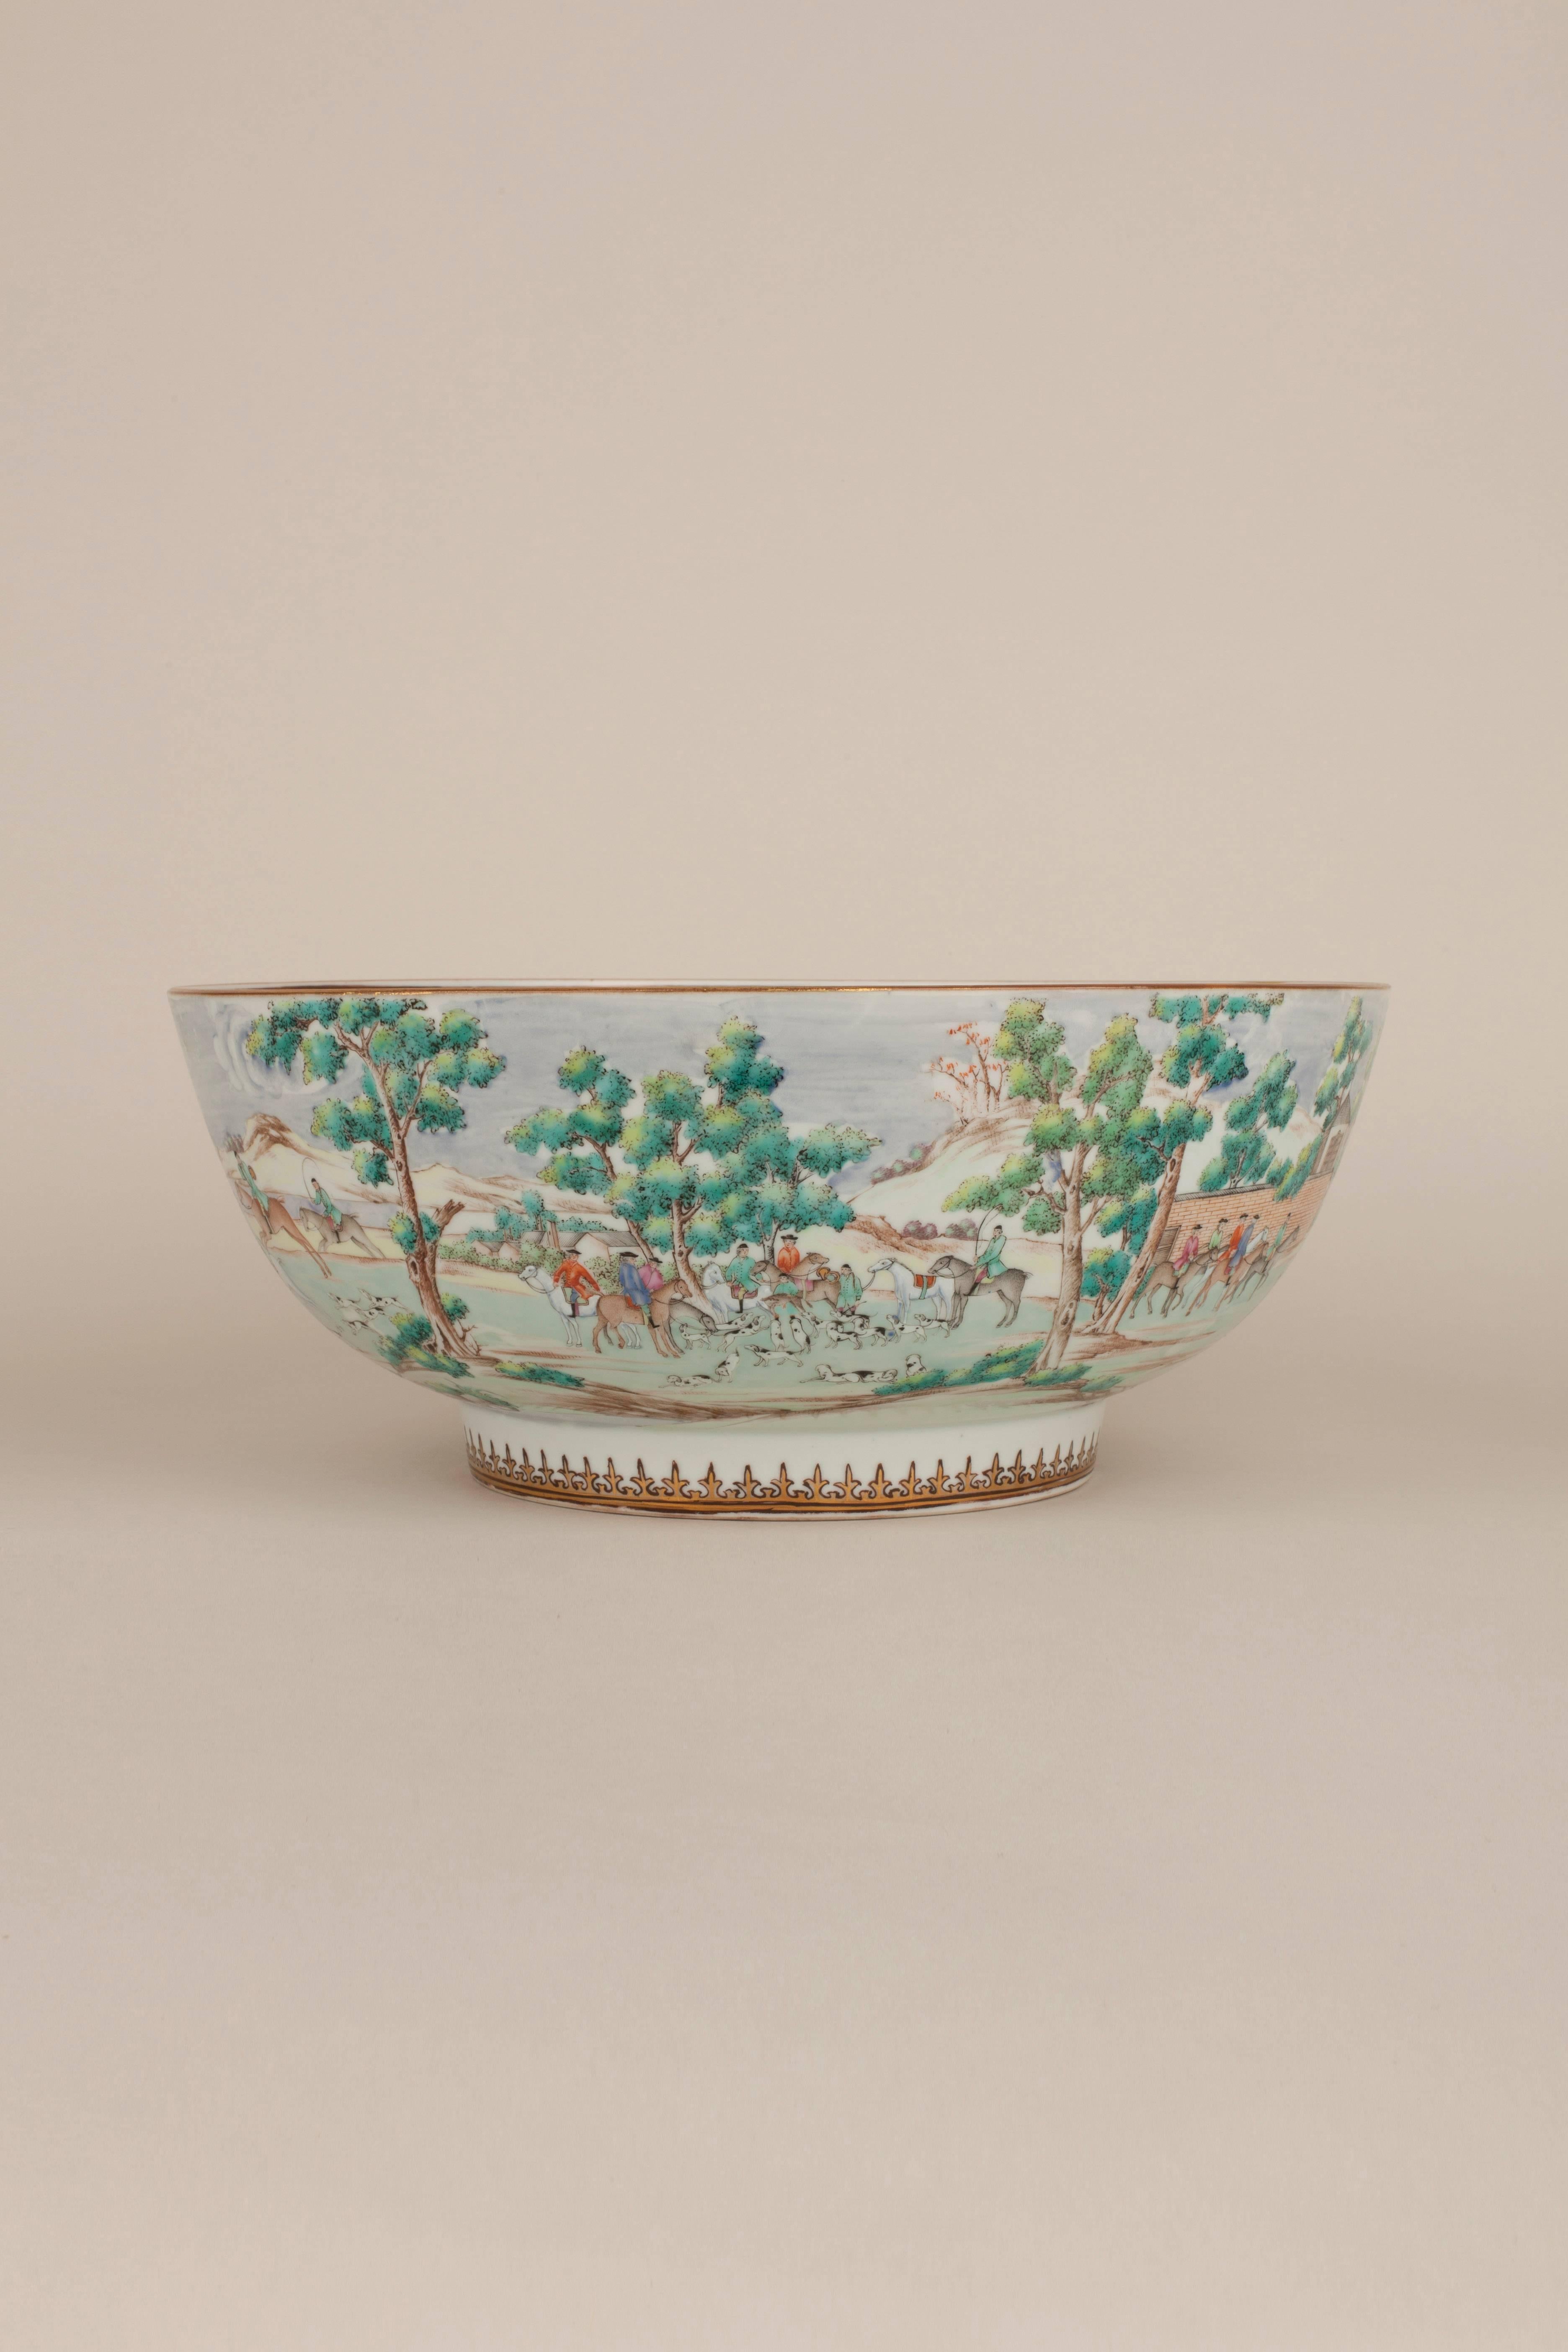 Qing Chinese Export Porcelain Famille Rose English Market Hunting Bowl, 18th Century